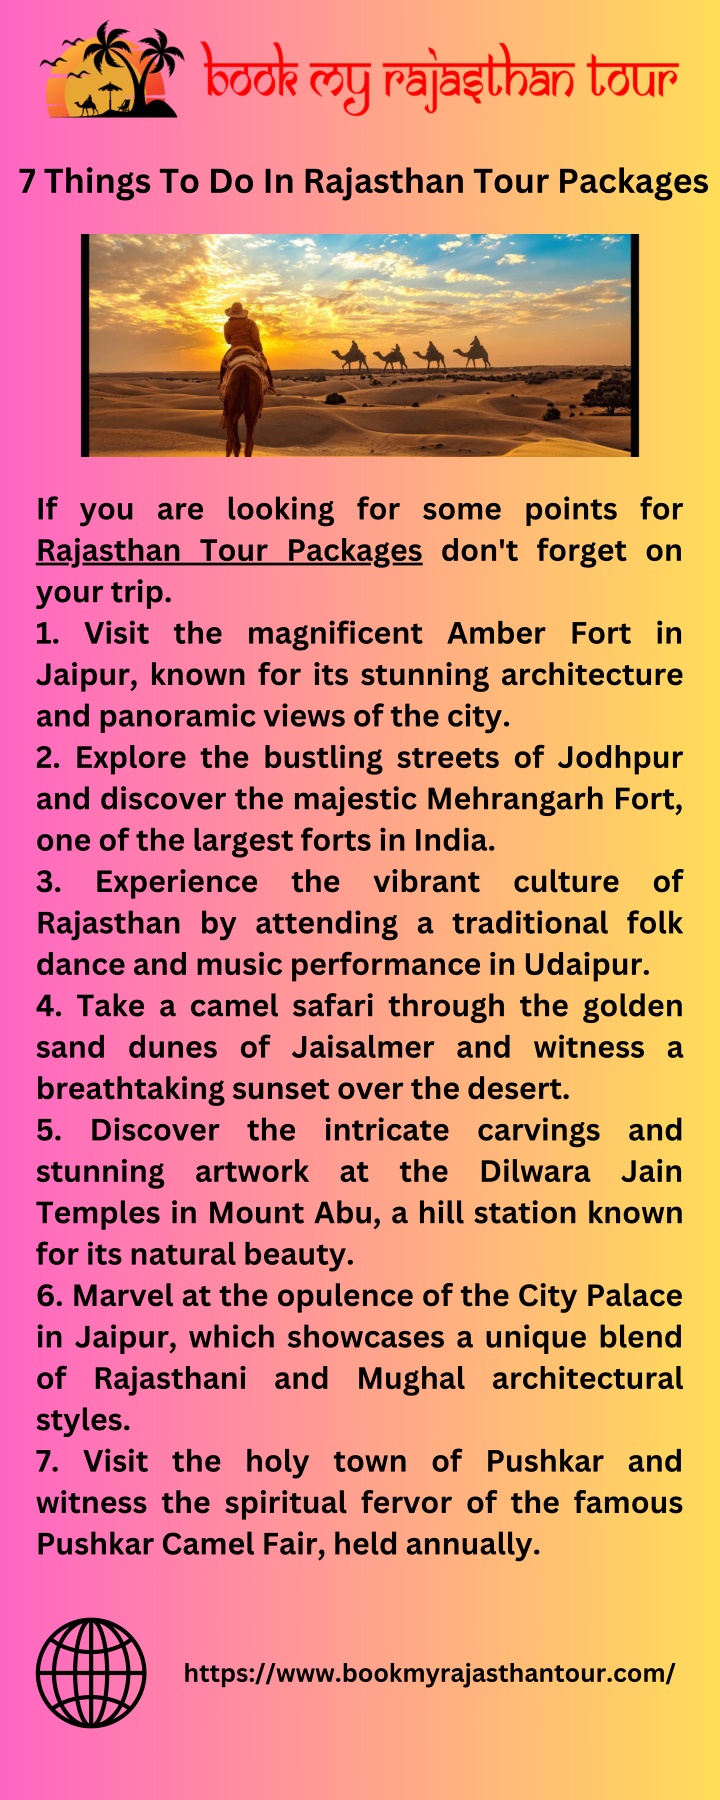 7 things to do in rajasthan tour packages